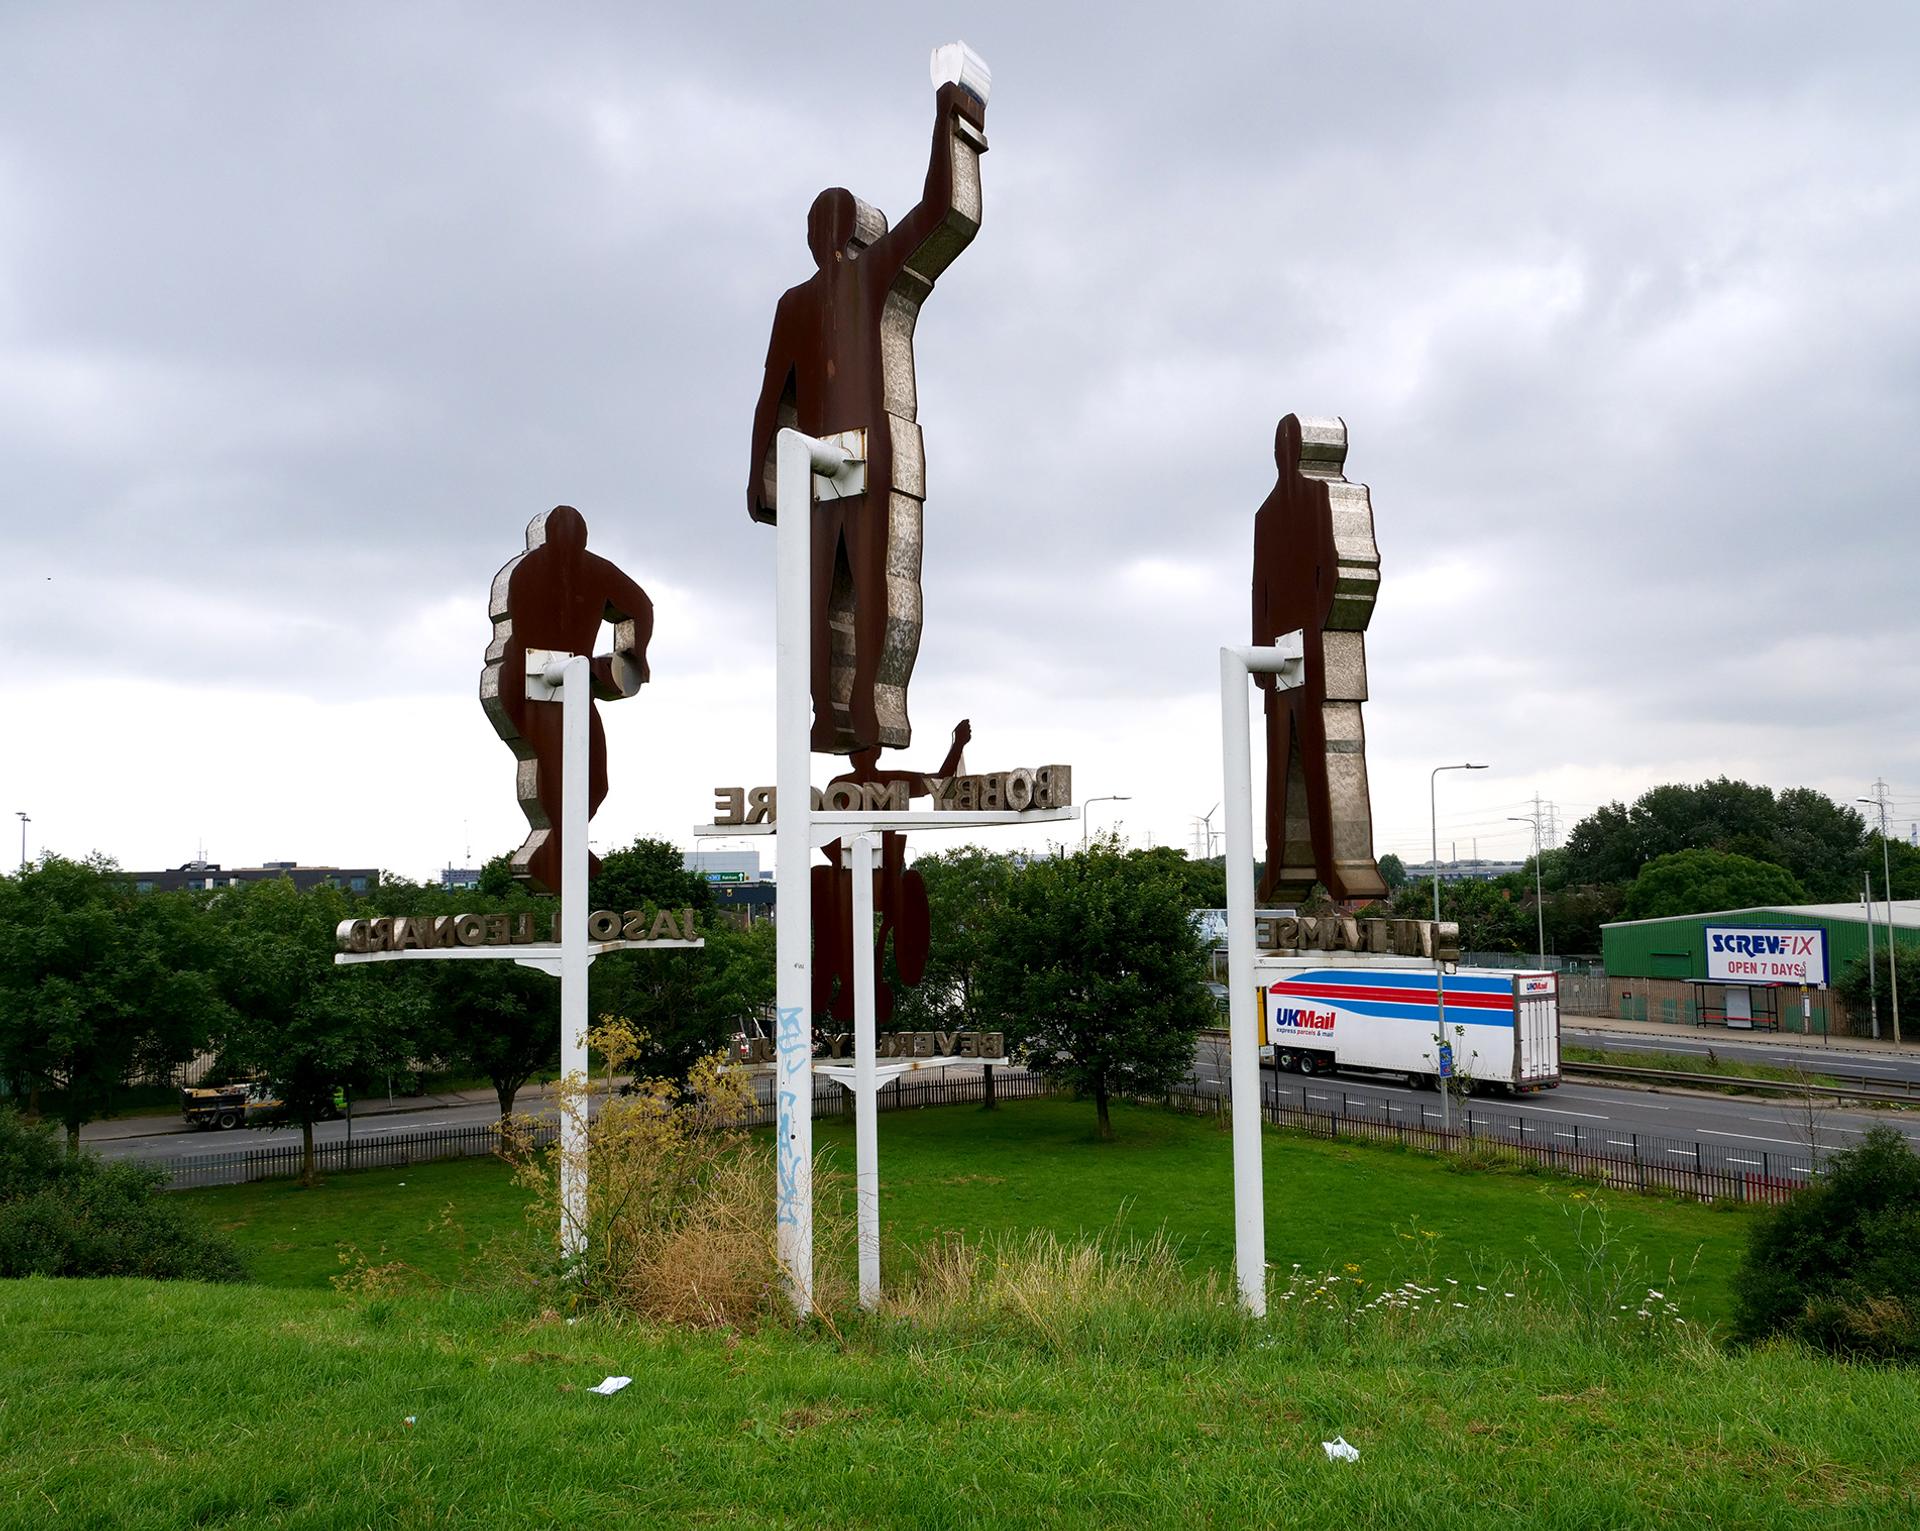 Statues of ex-England football captain Bobby Moore, manager Sir Alf Ramsay, international rugby player Jason Leonard, and champion Paralympic swimmer Beverley Gull, at Castle Green near the A13.